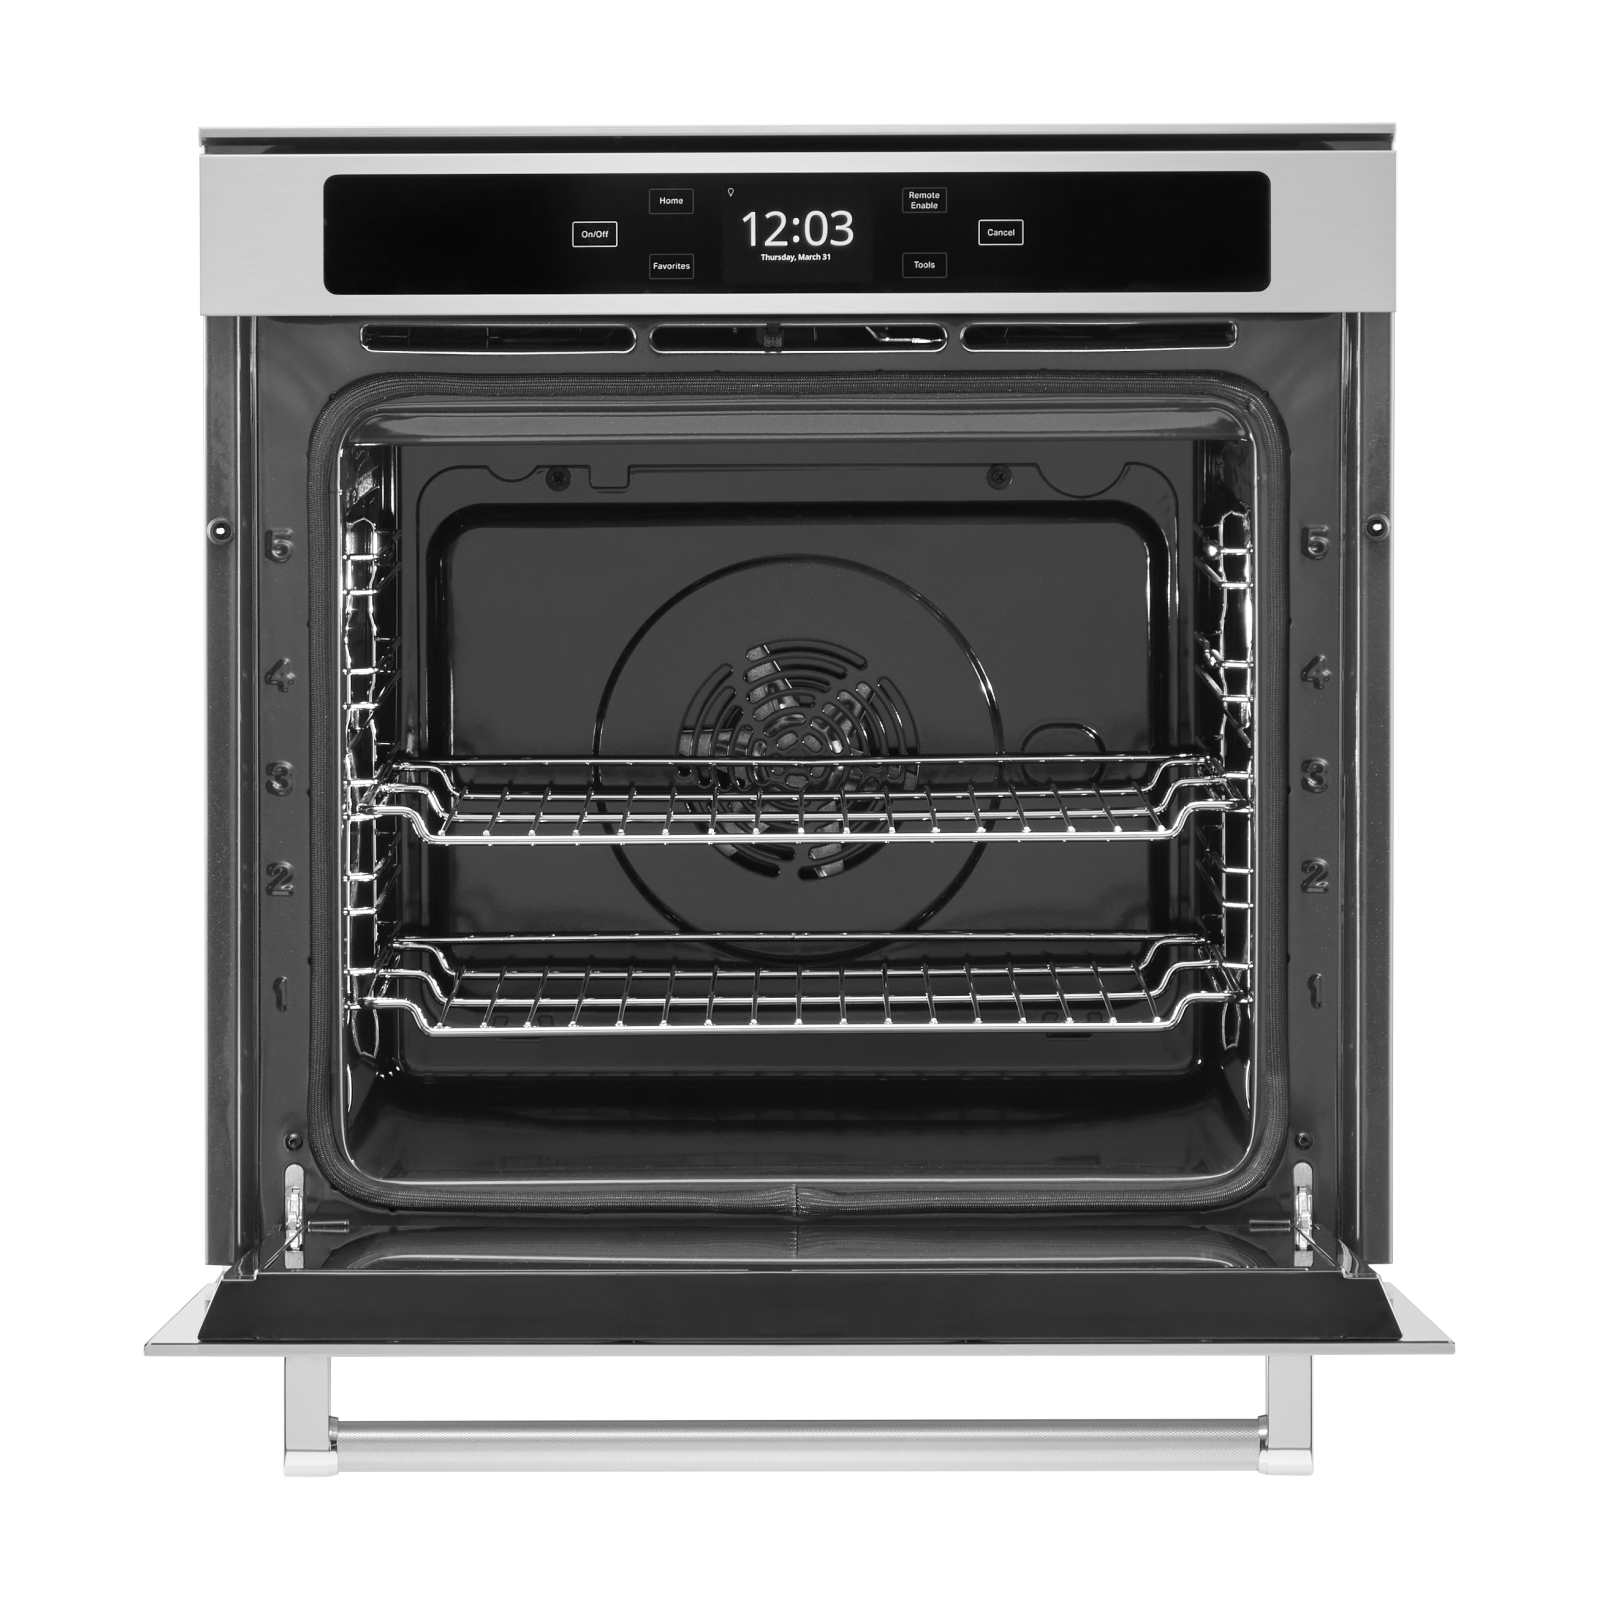 KitchenAid - 2.9 cu. ft Single Wall Oven in Stainless - YKOSC504PPS